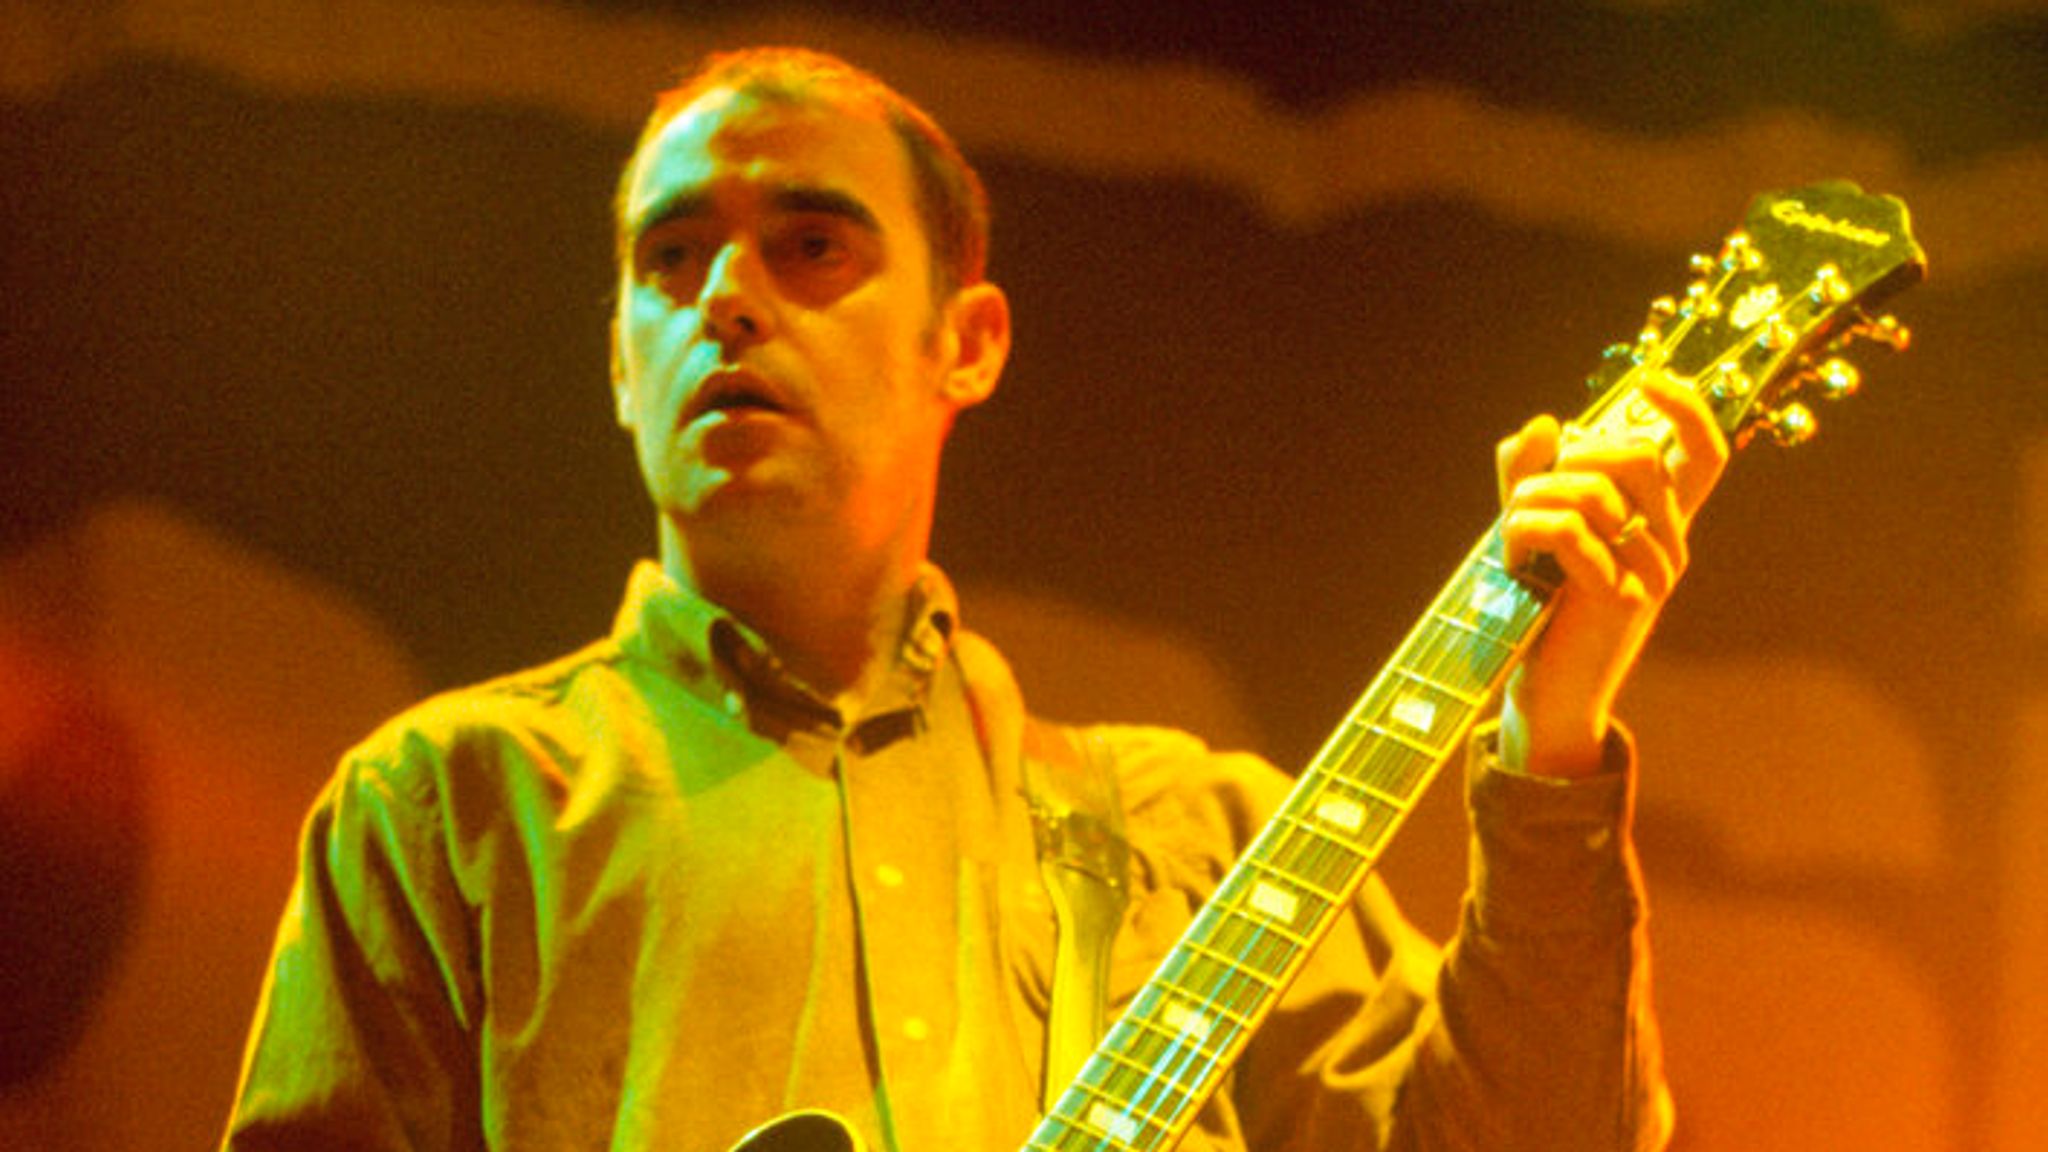 Oasis: Guitarist Bonehead diagnosed with tonsil cancer | Ents & Arts News | Sky News